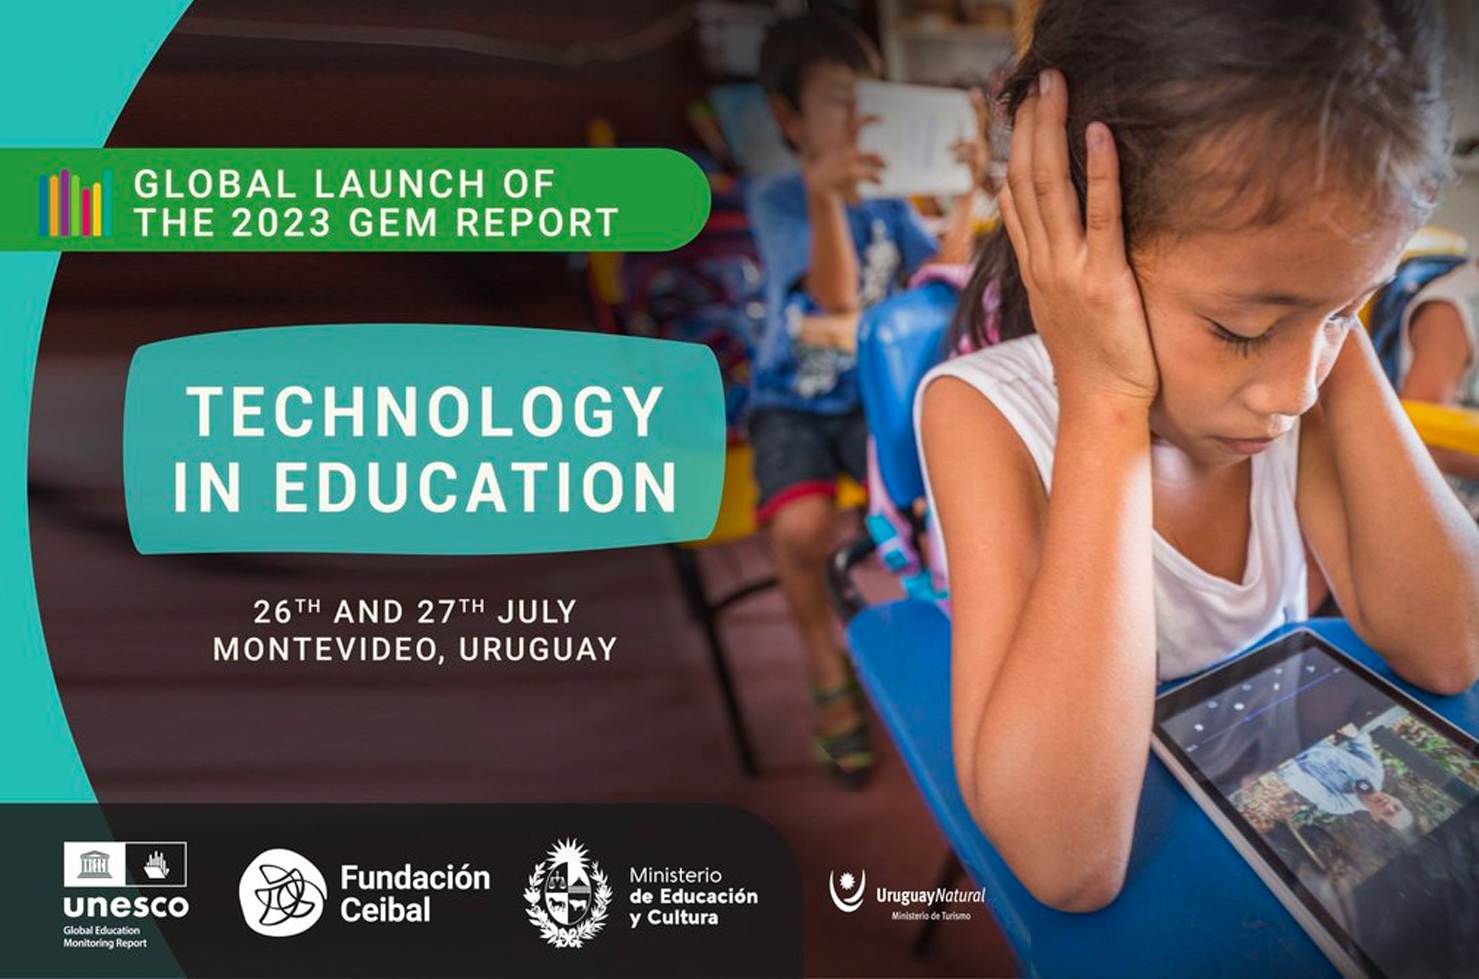 Global launch of the 2023 GEM Report on technology in education in Montevideo